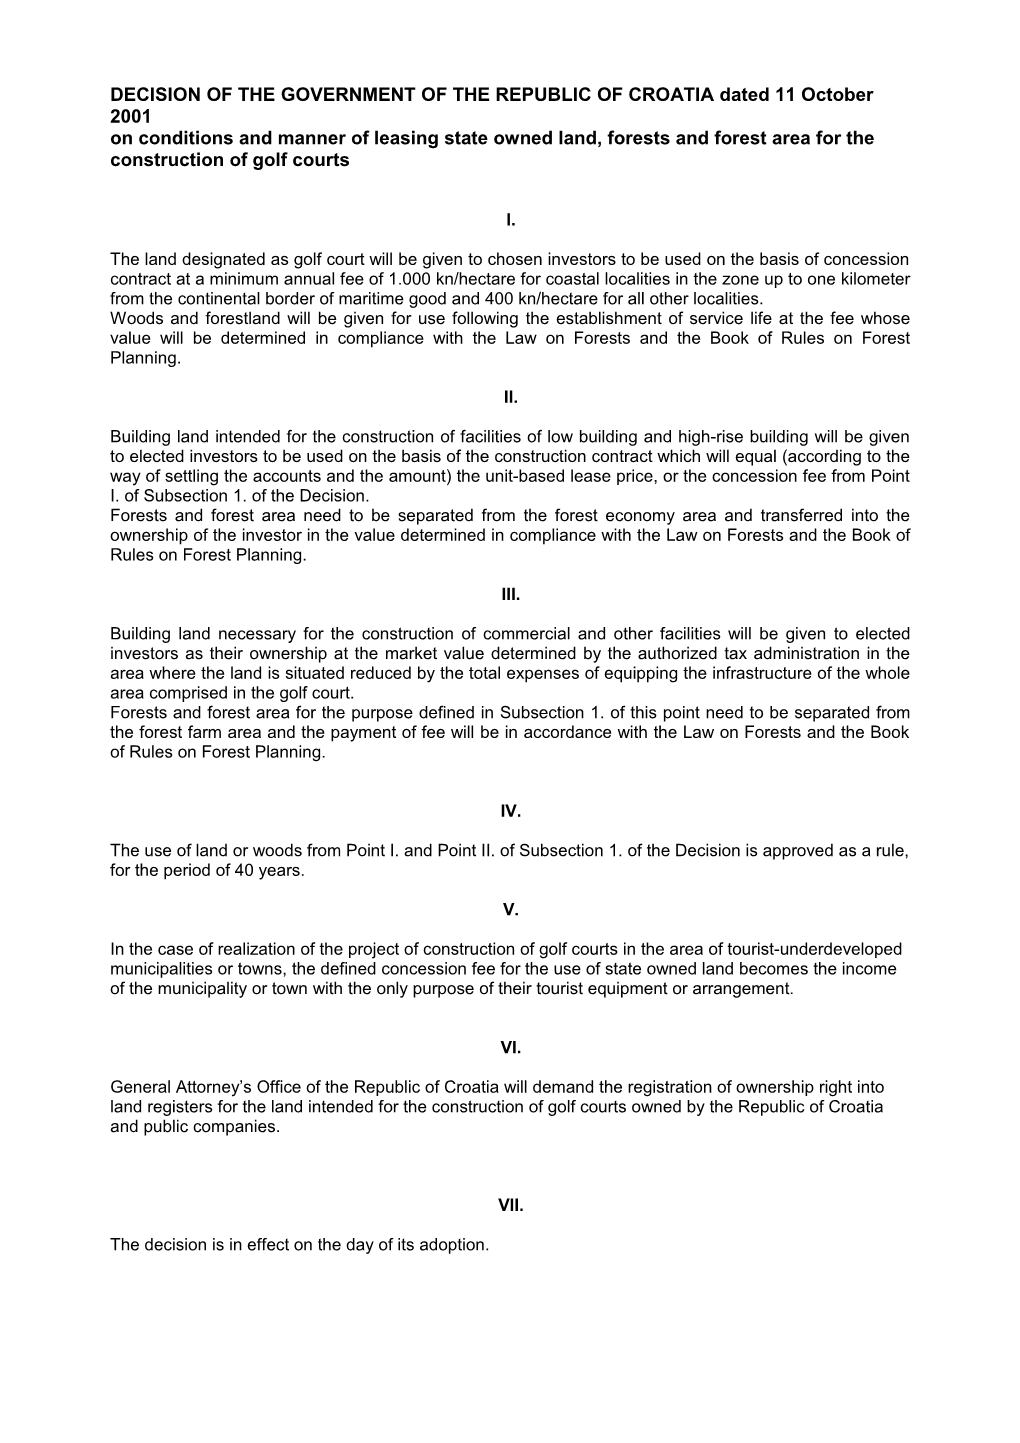 DECISION of the GOVERNMENT of the REPUBLIC of CROATIA Dated 11 October 2001